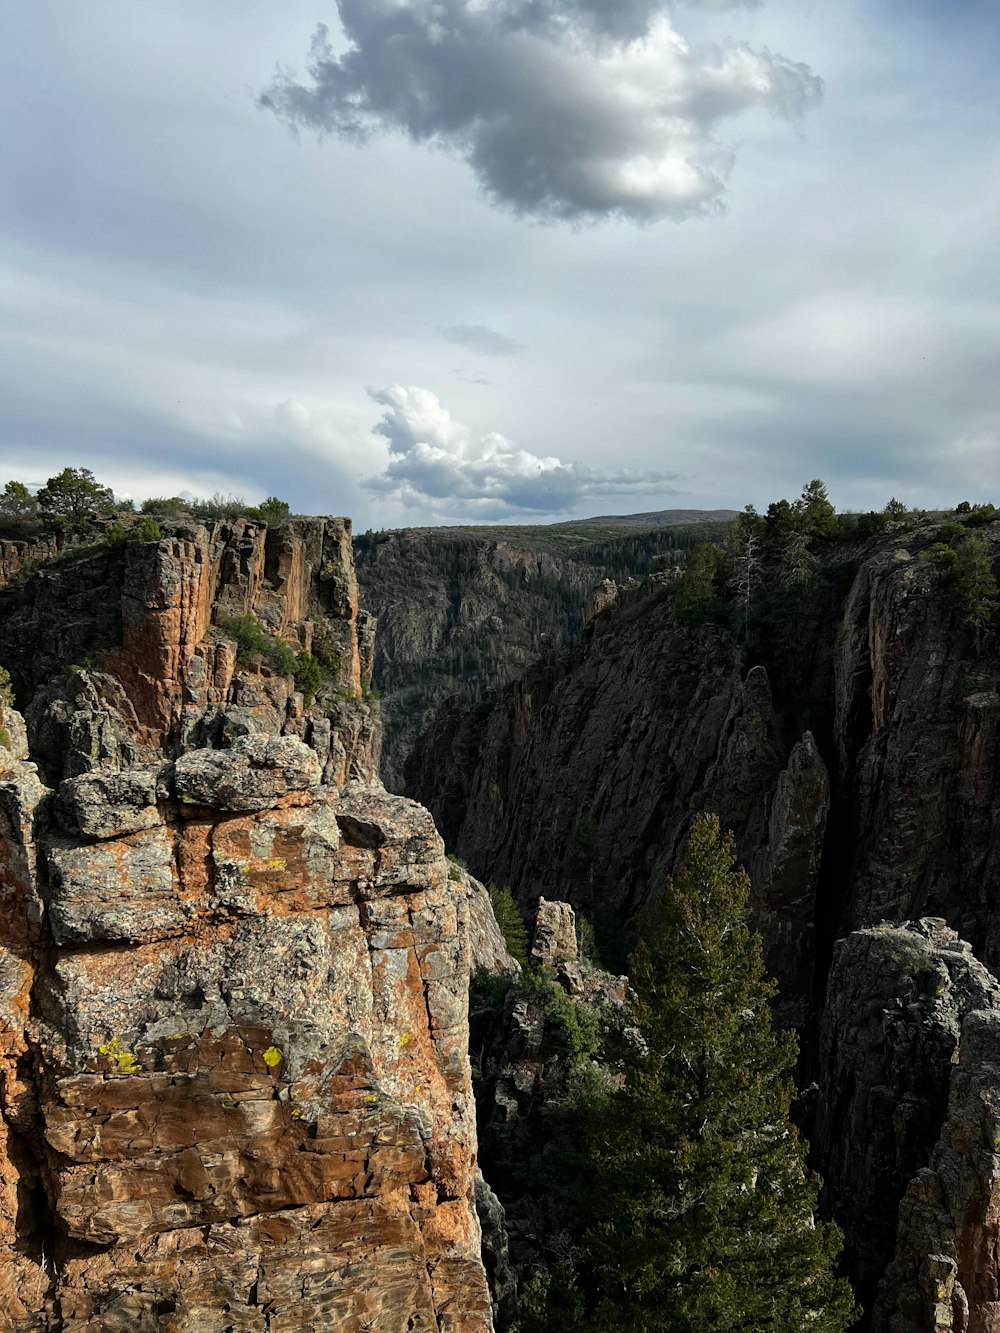 a view of a rocky cliff with trees and clouds in the background